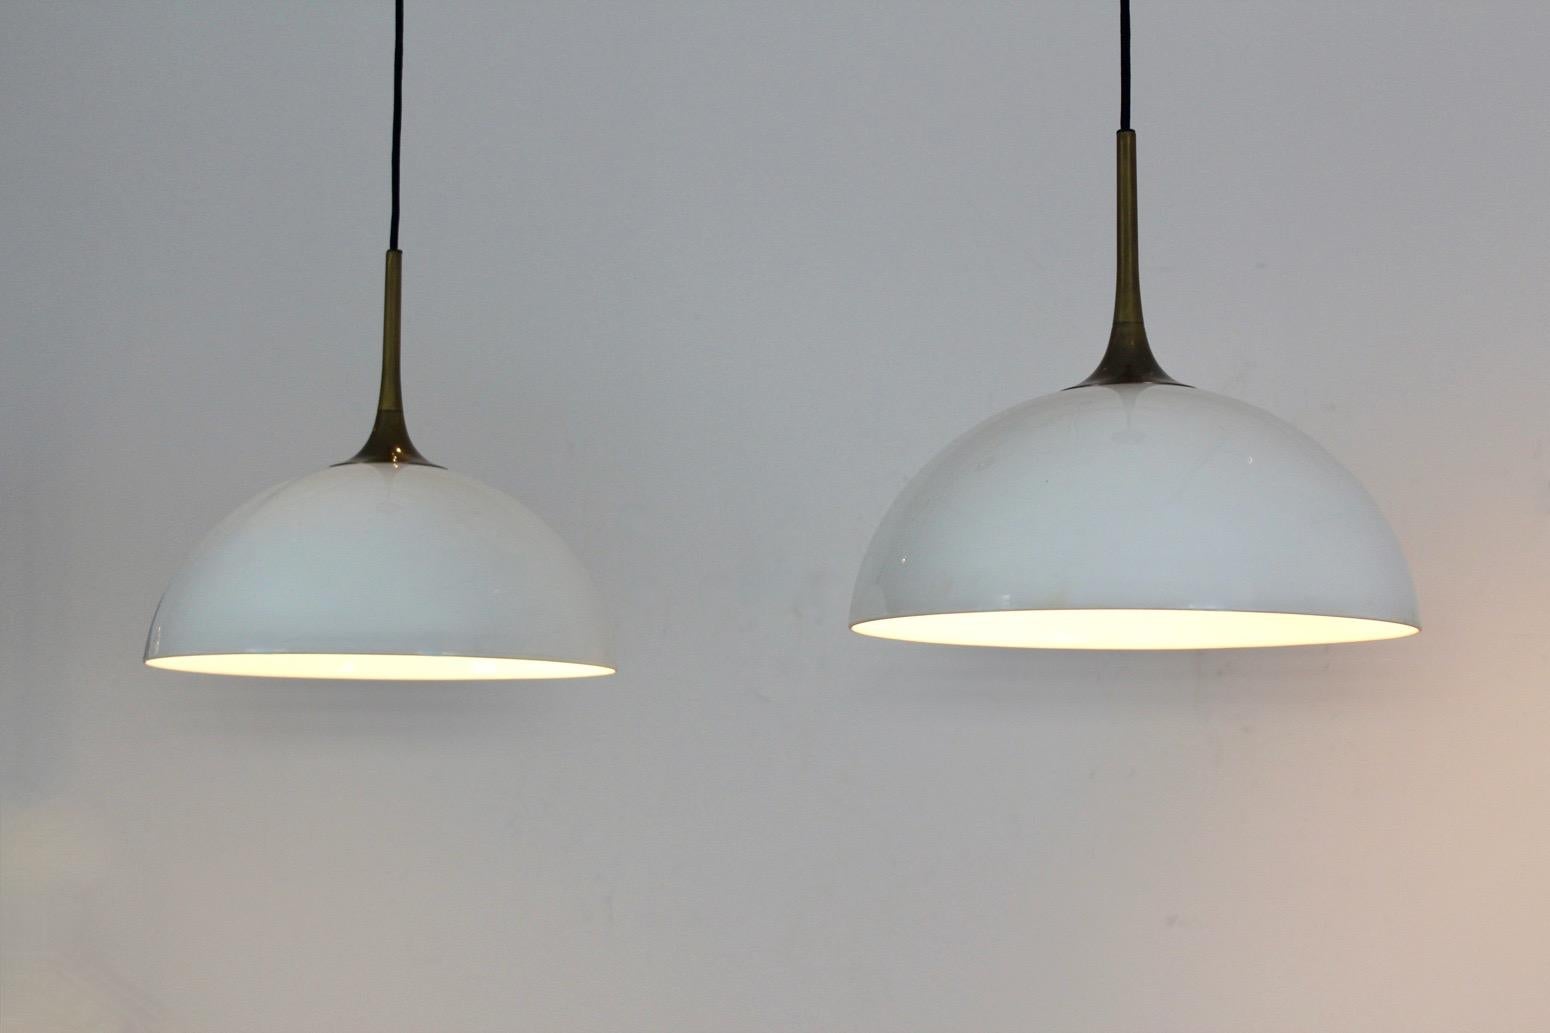 Pair of rare and wonderful solid brass and blown glass white-opal pendant lights by Florian Schulz, Germany. The pendant lamps are incredibly well made and very versatile because the height is adjustable as the length of the wire is 2 meters. The